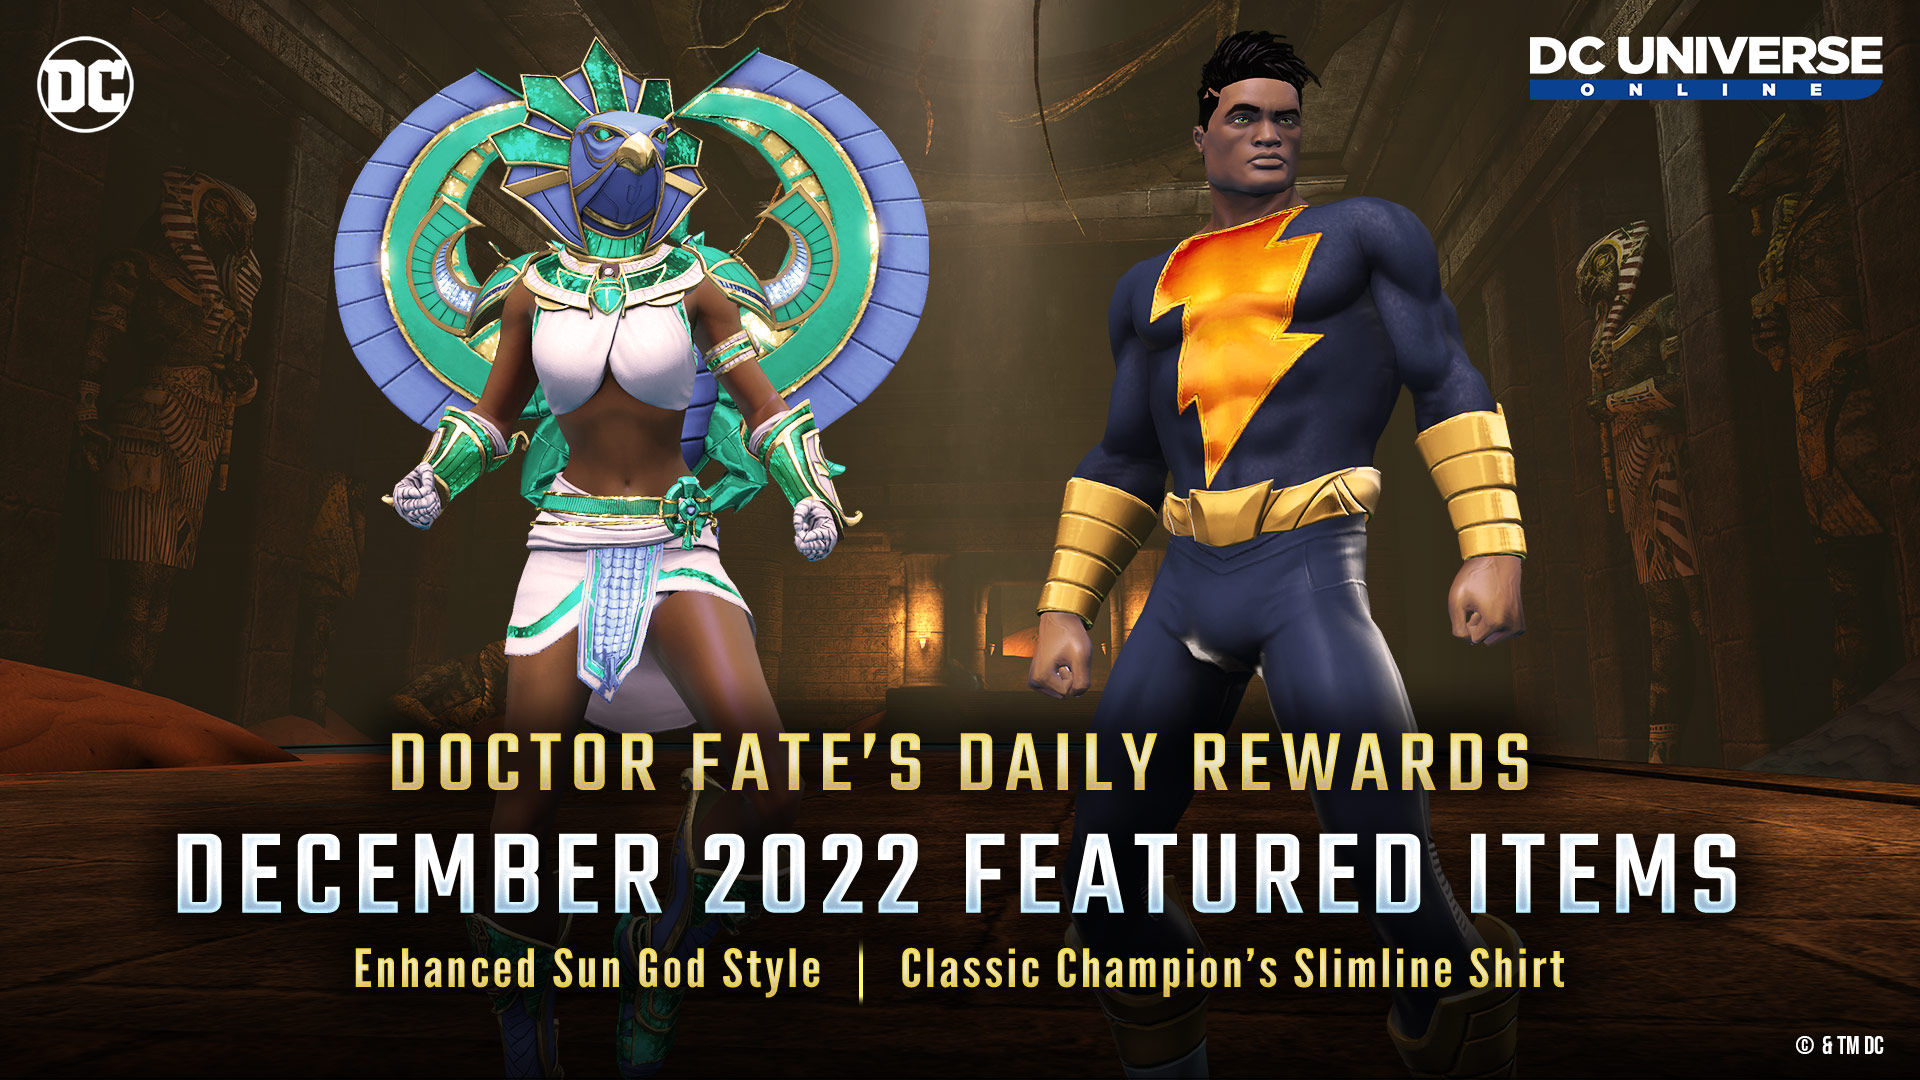 Doctor Fate's Daily Rewards - December 2022